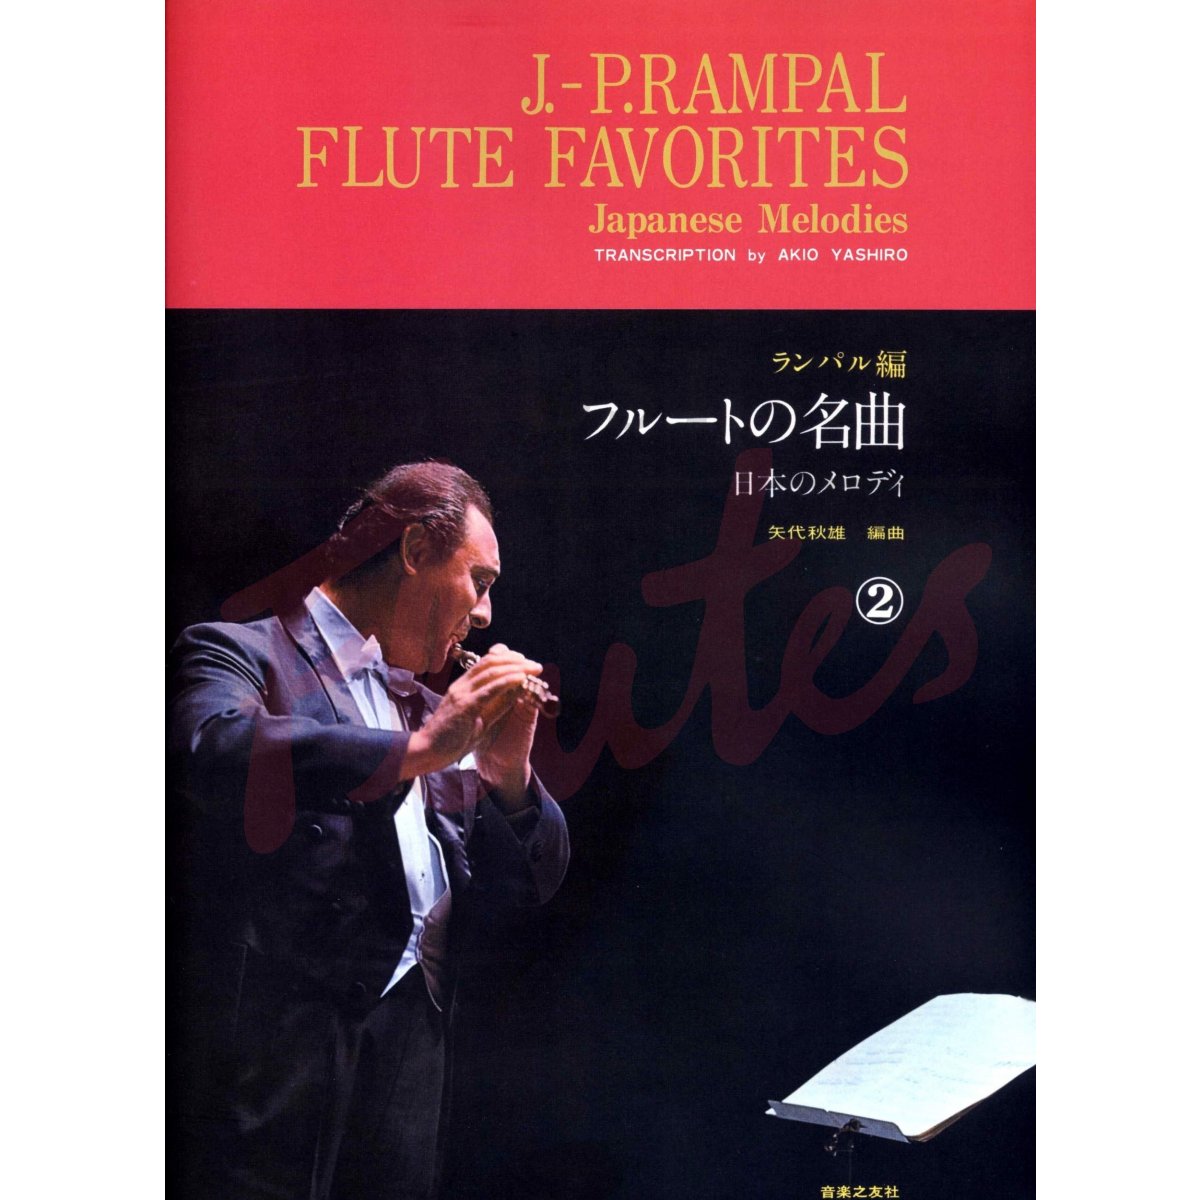 Flute Favorites Vol 2: Japanese Melodies for Flute and Piano